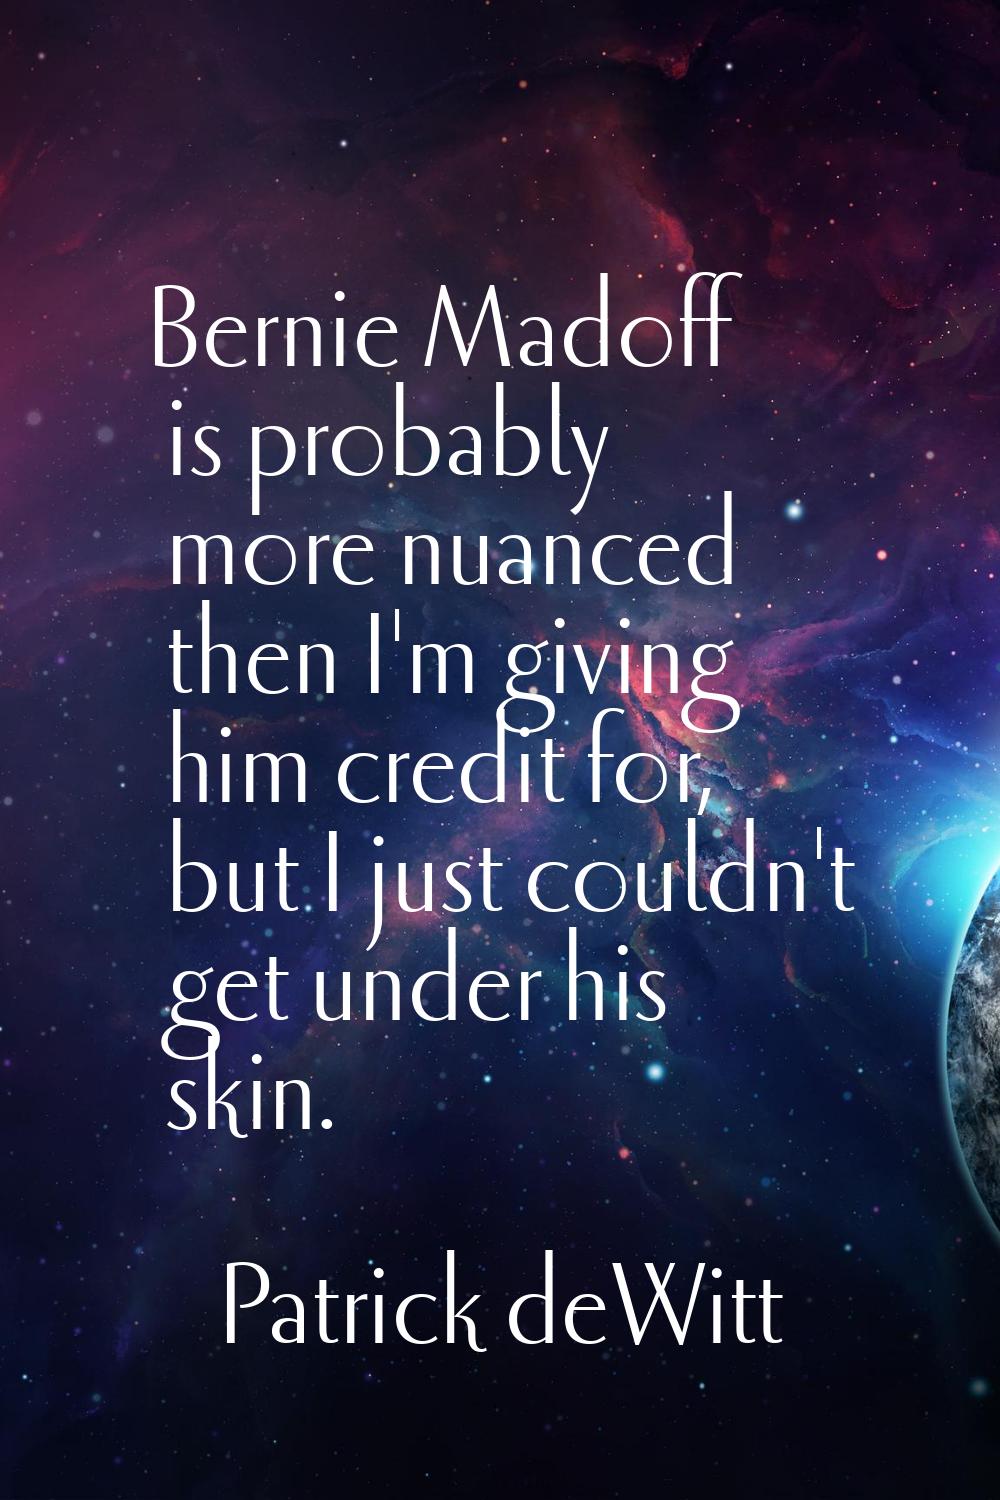 Bernie Madoff is probably more nuanced then I'm giving him credit for, but I just couldn't get unde